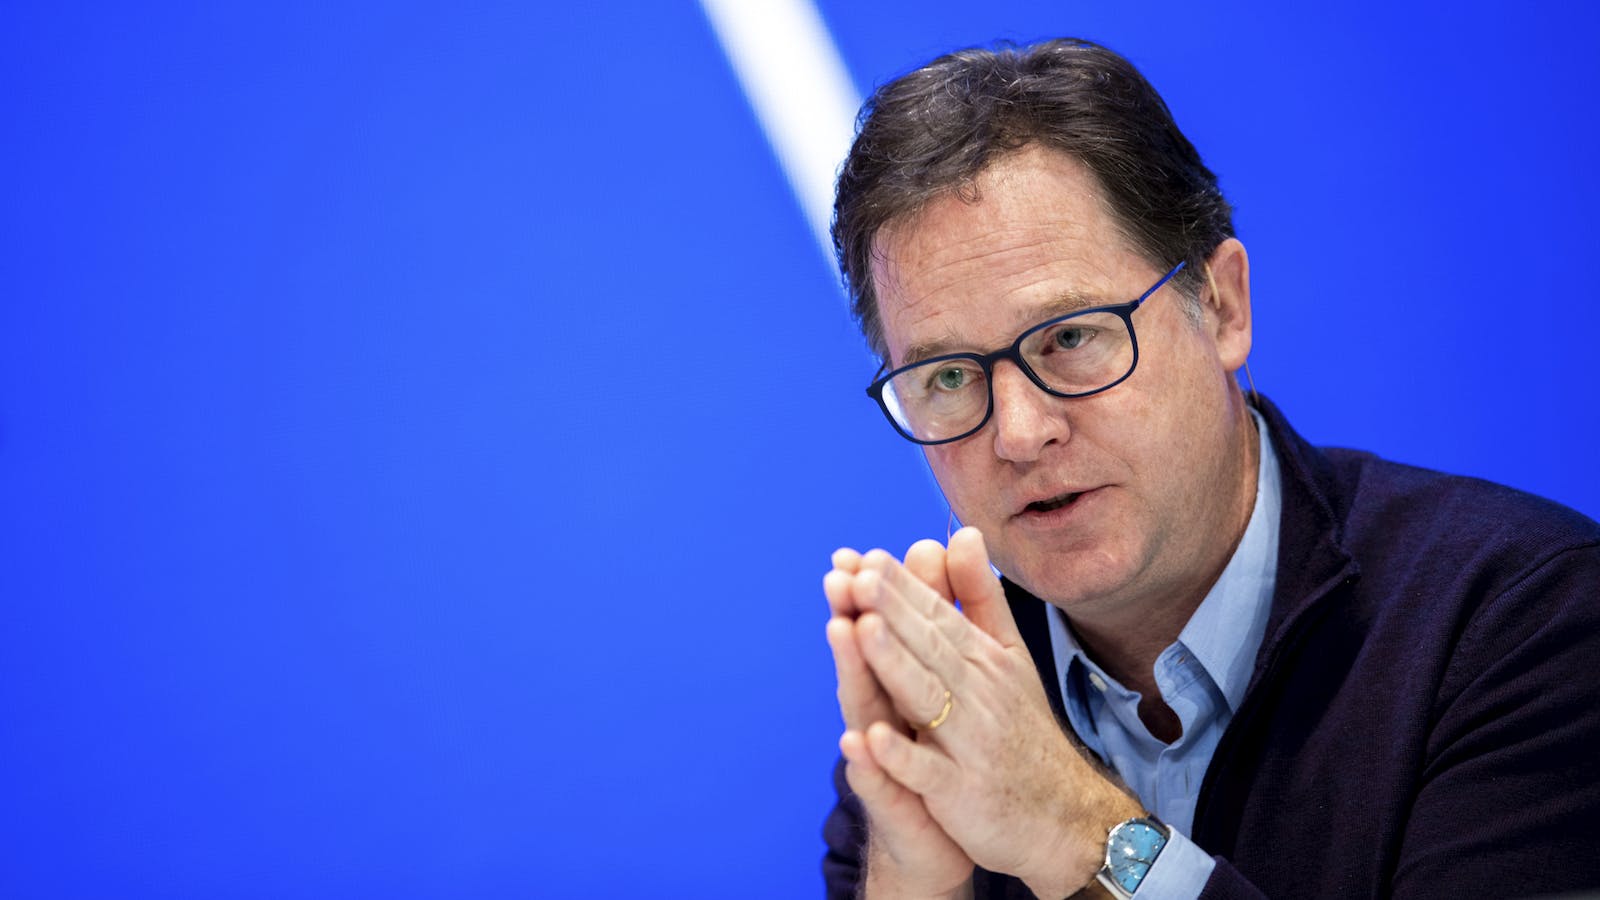 Nick Clegg, Facebook's VP of Global Affairs and co-author of Sunday's EU hiring announcement. Photo: AP